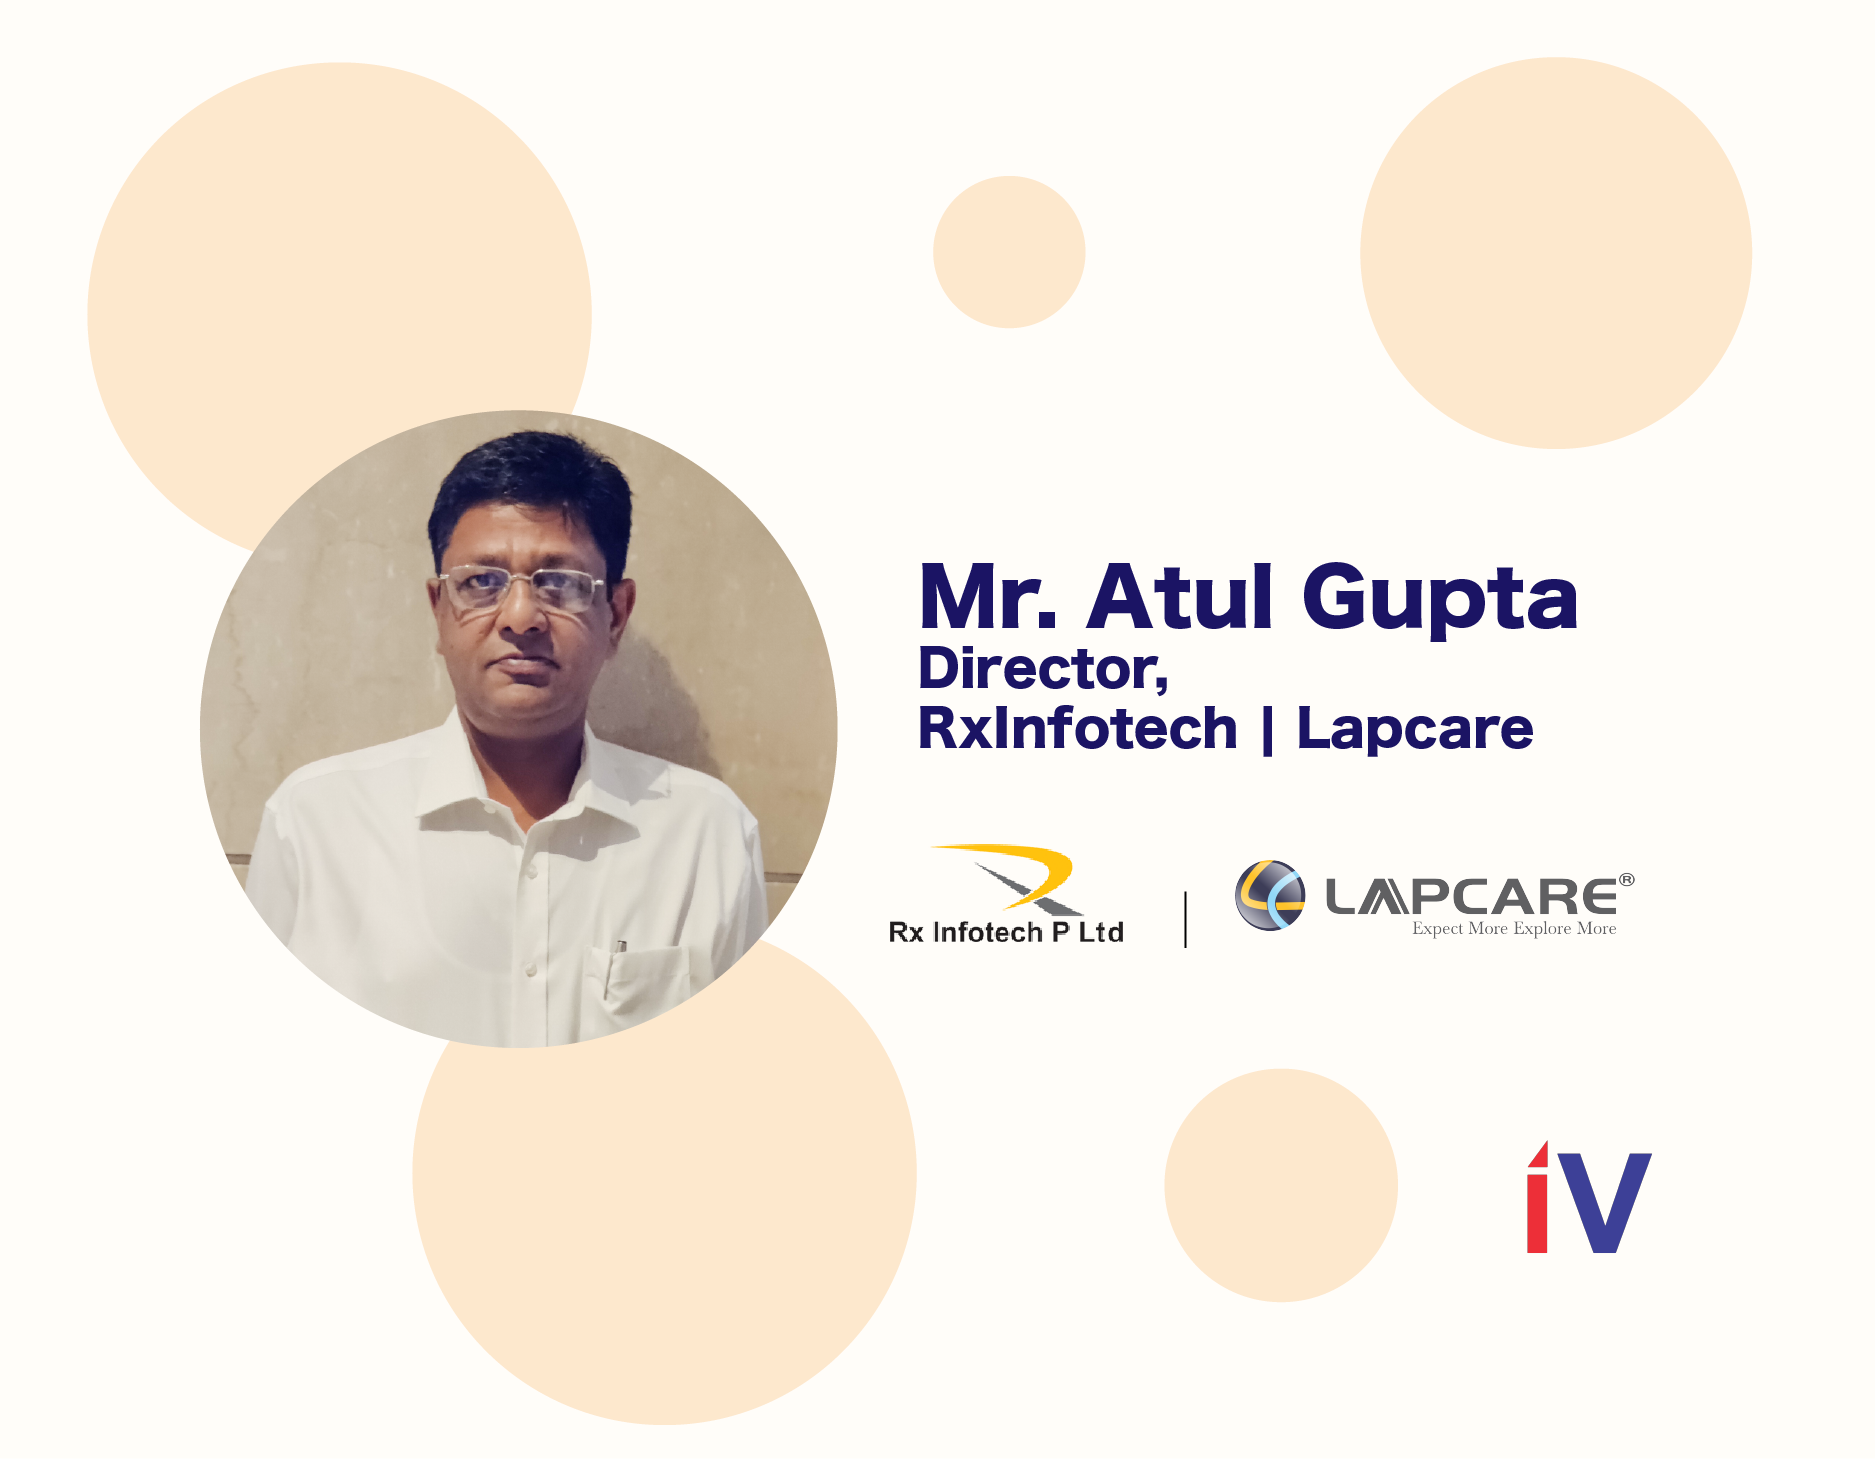 "Lapcare is the leading global distribution organization of choice that provides innovative, high-quality, and technically advanced products."